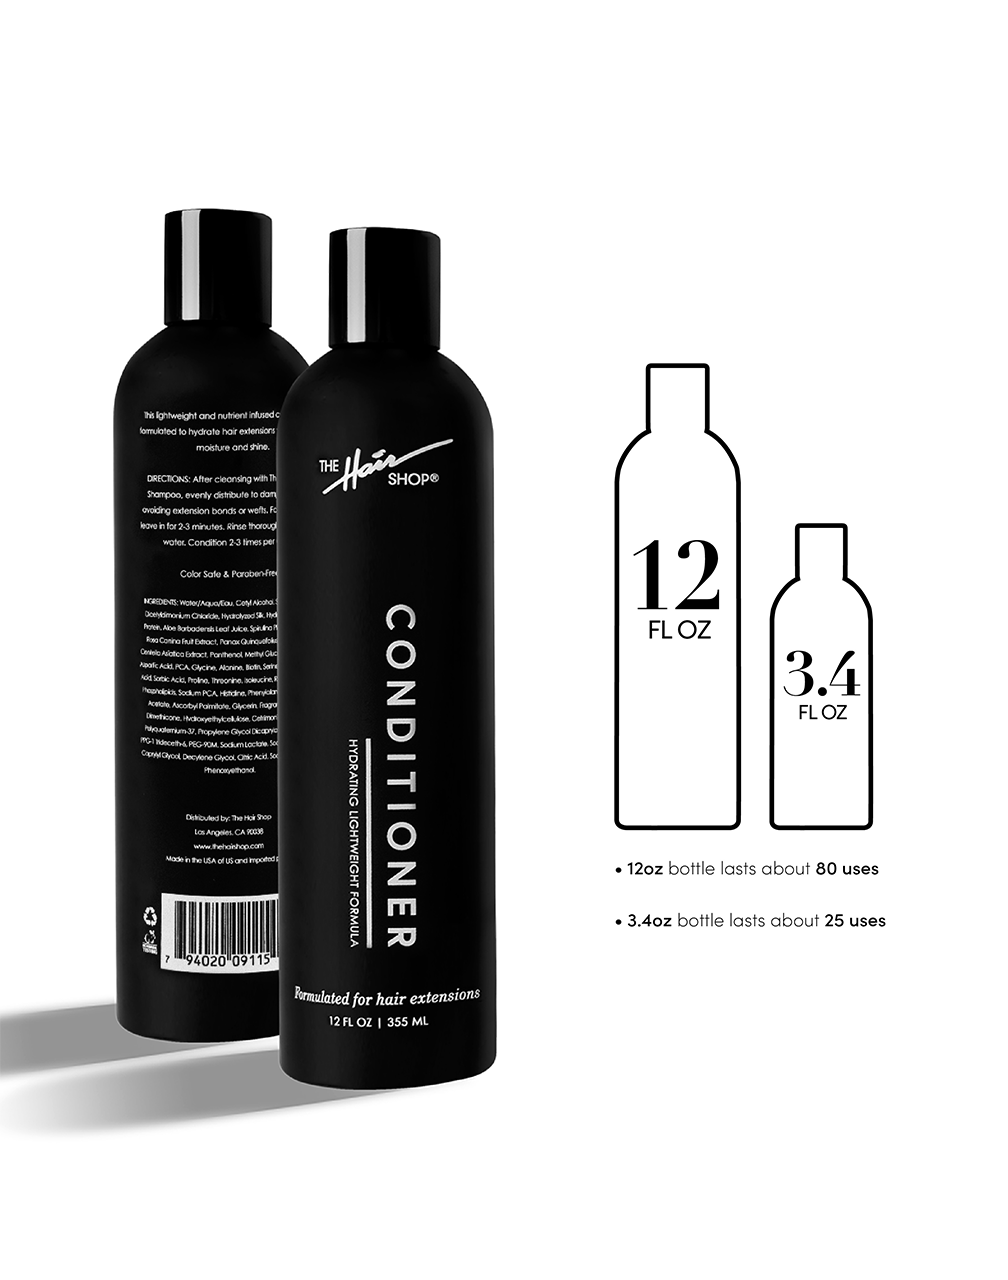 Conditioner. 12 fl oz bottle lasts about 80 uses. 3.4 fl oz bottle lasts about 25 uses